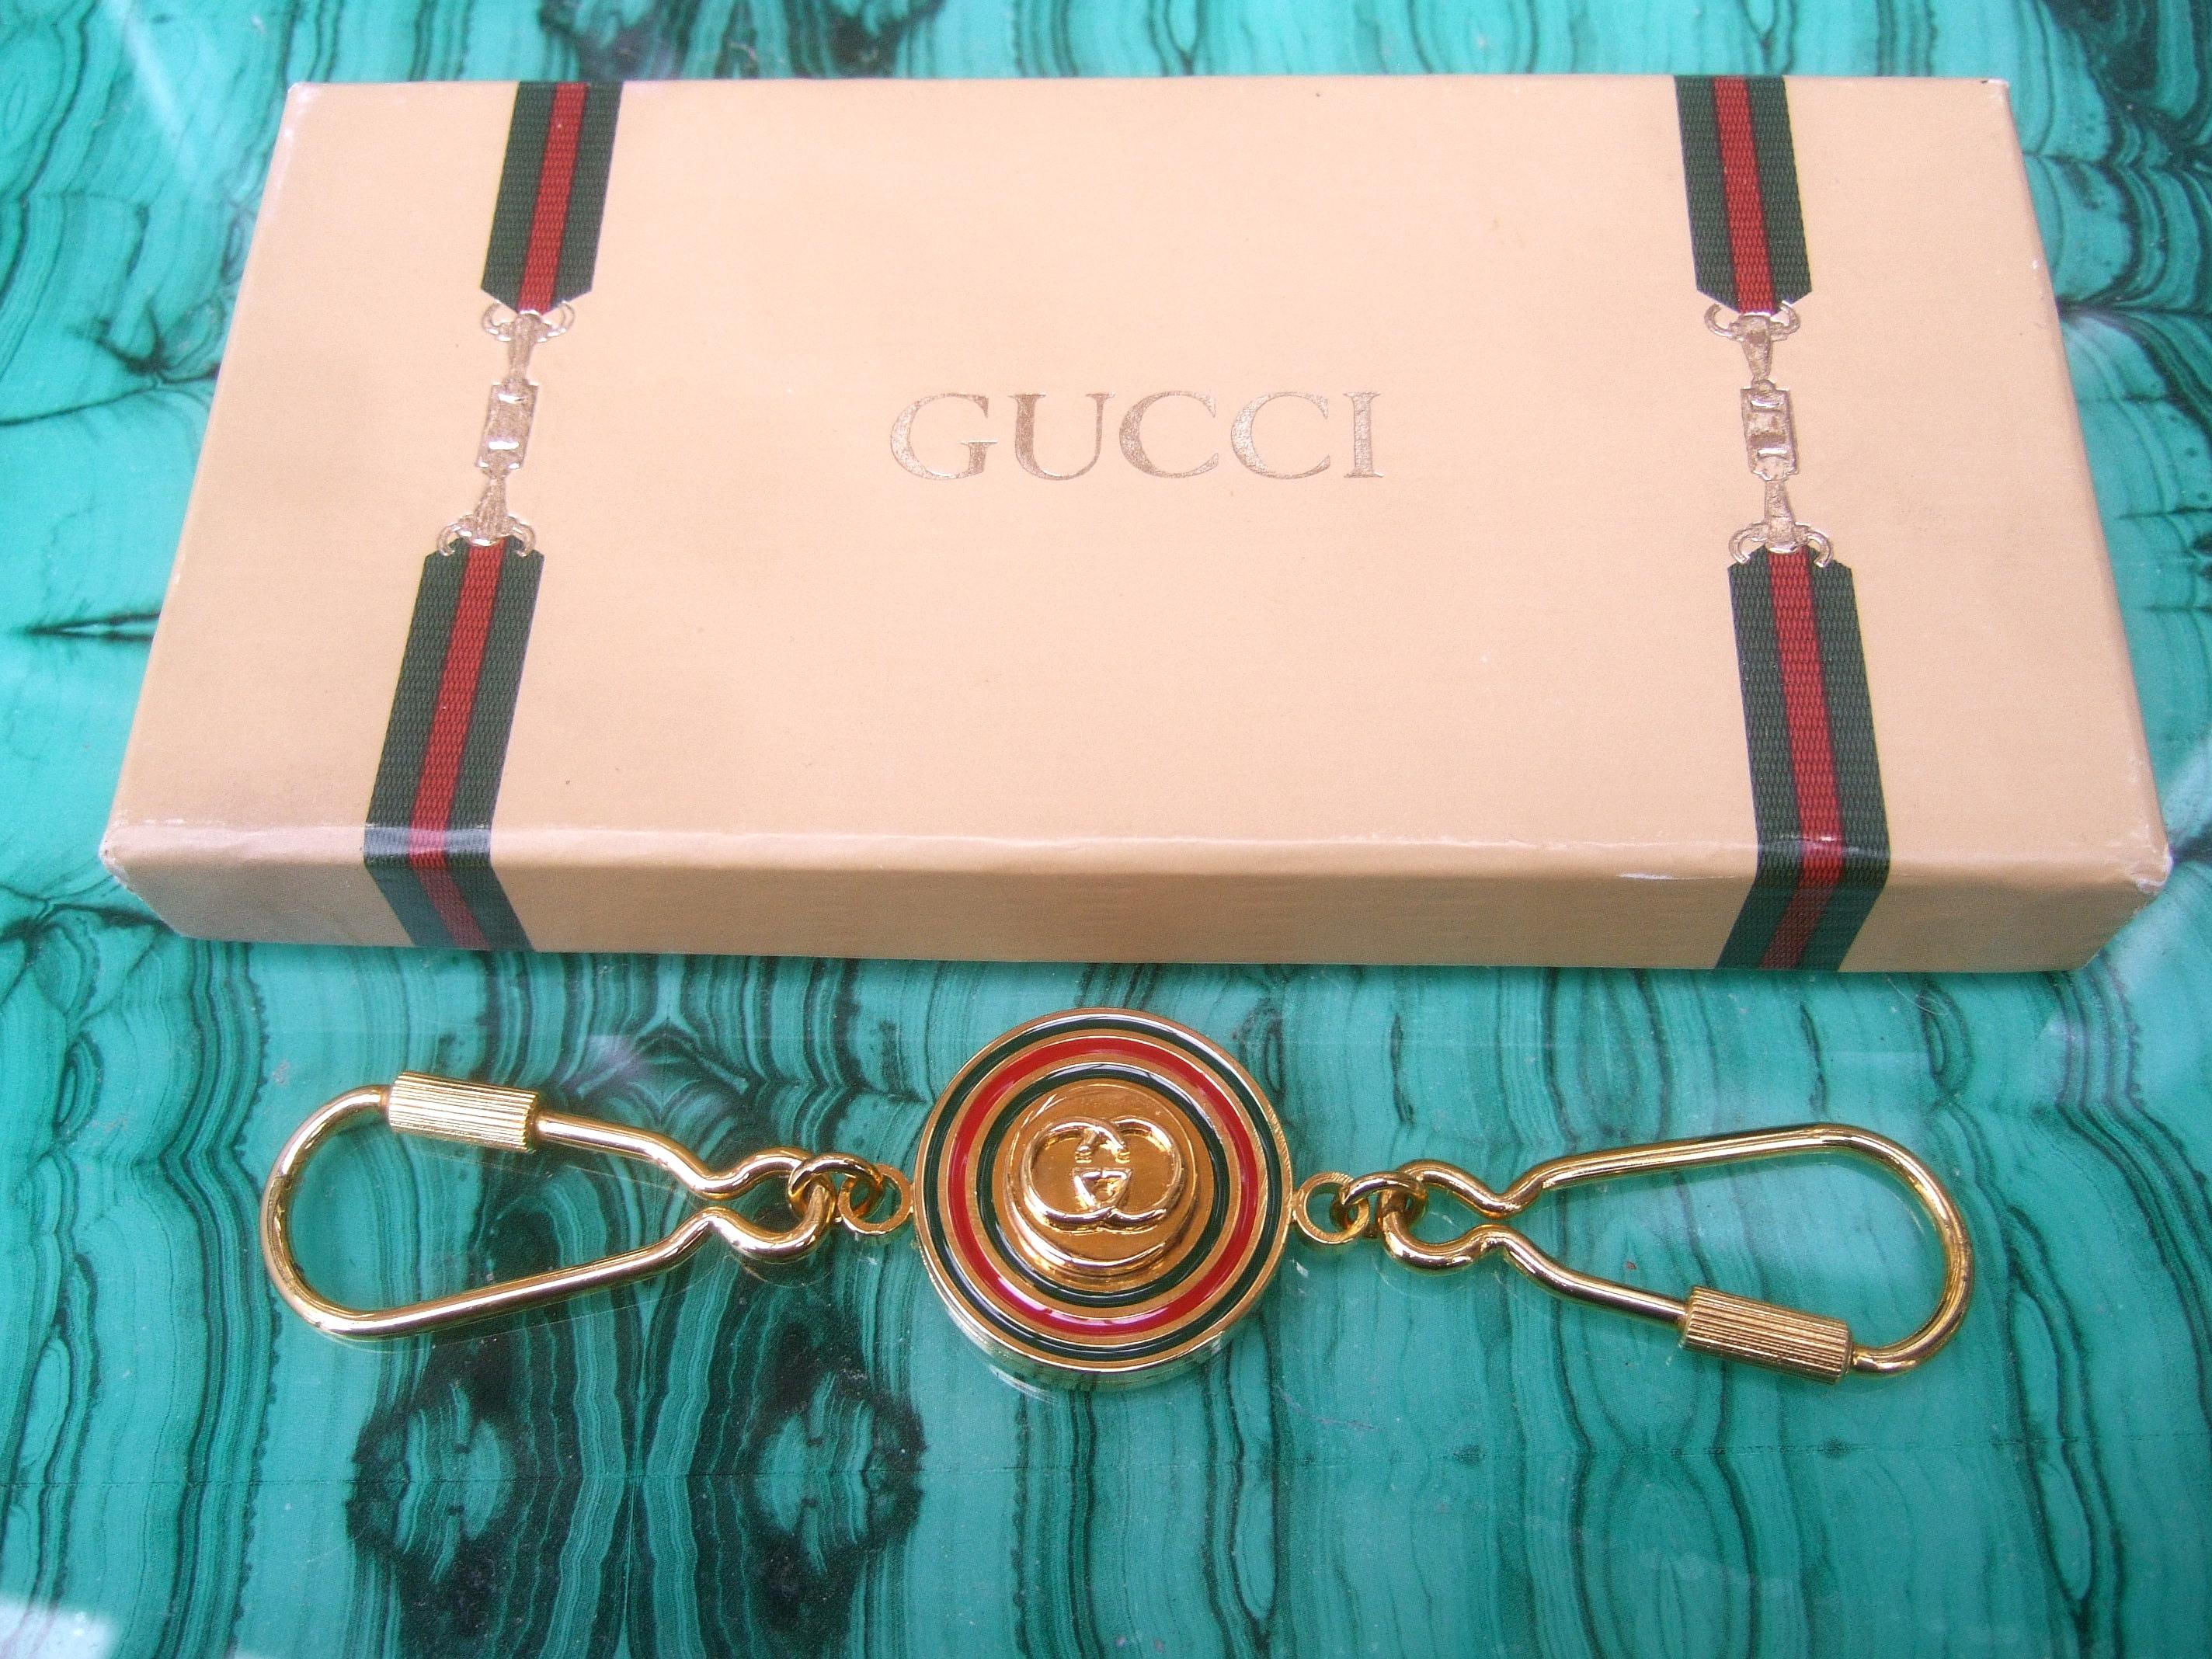 Gucci Italy Gilt enamel keychain in original Gucci cardboard presentation box c 1980s
The stylish unisex gilt metal keychain is designed with a circular medallion in the center
with Gucci's interlocked G.G. initials; framed with red & green enamel